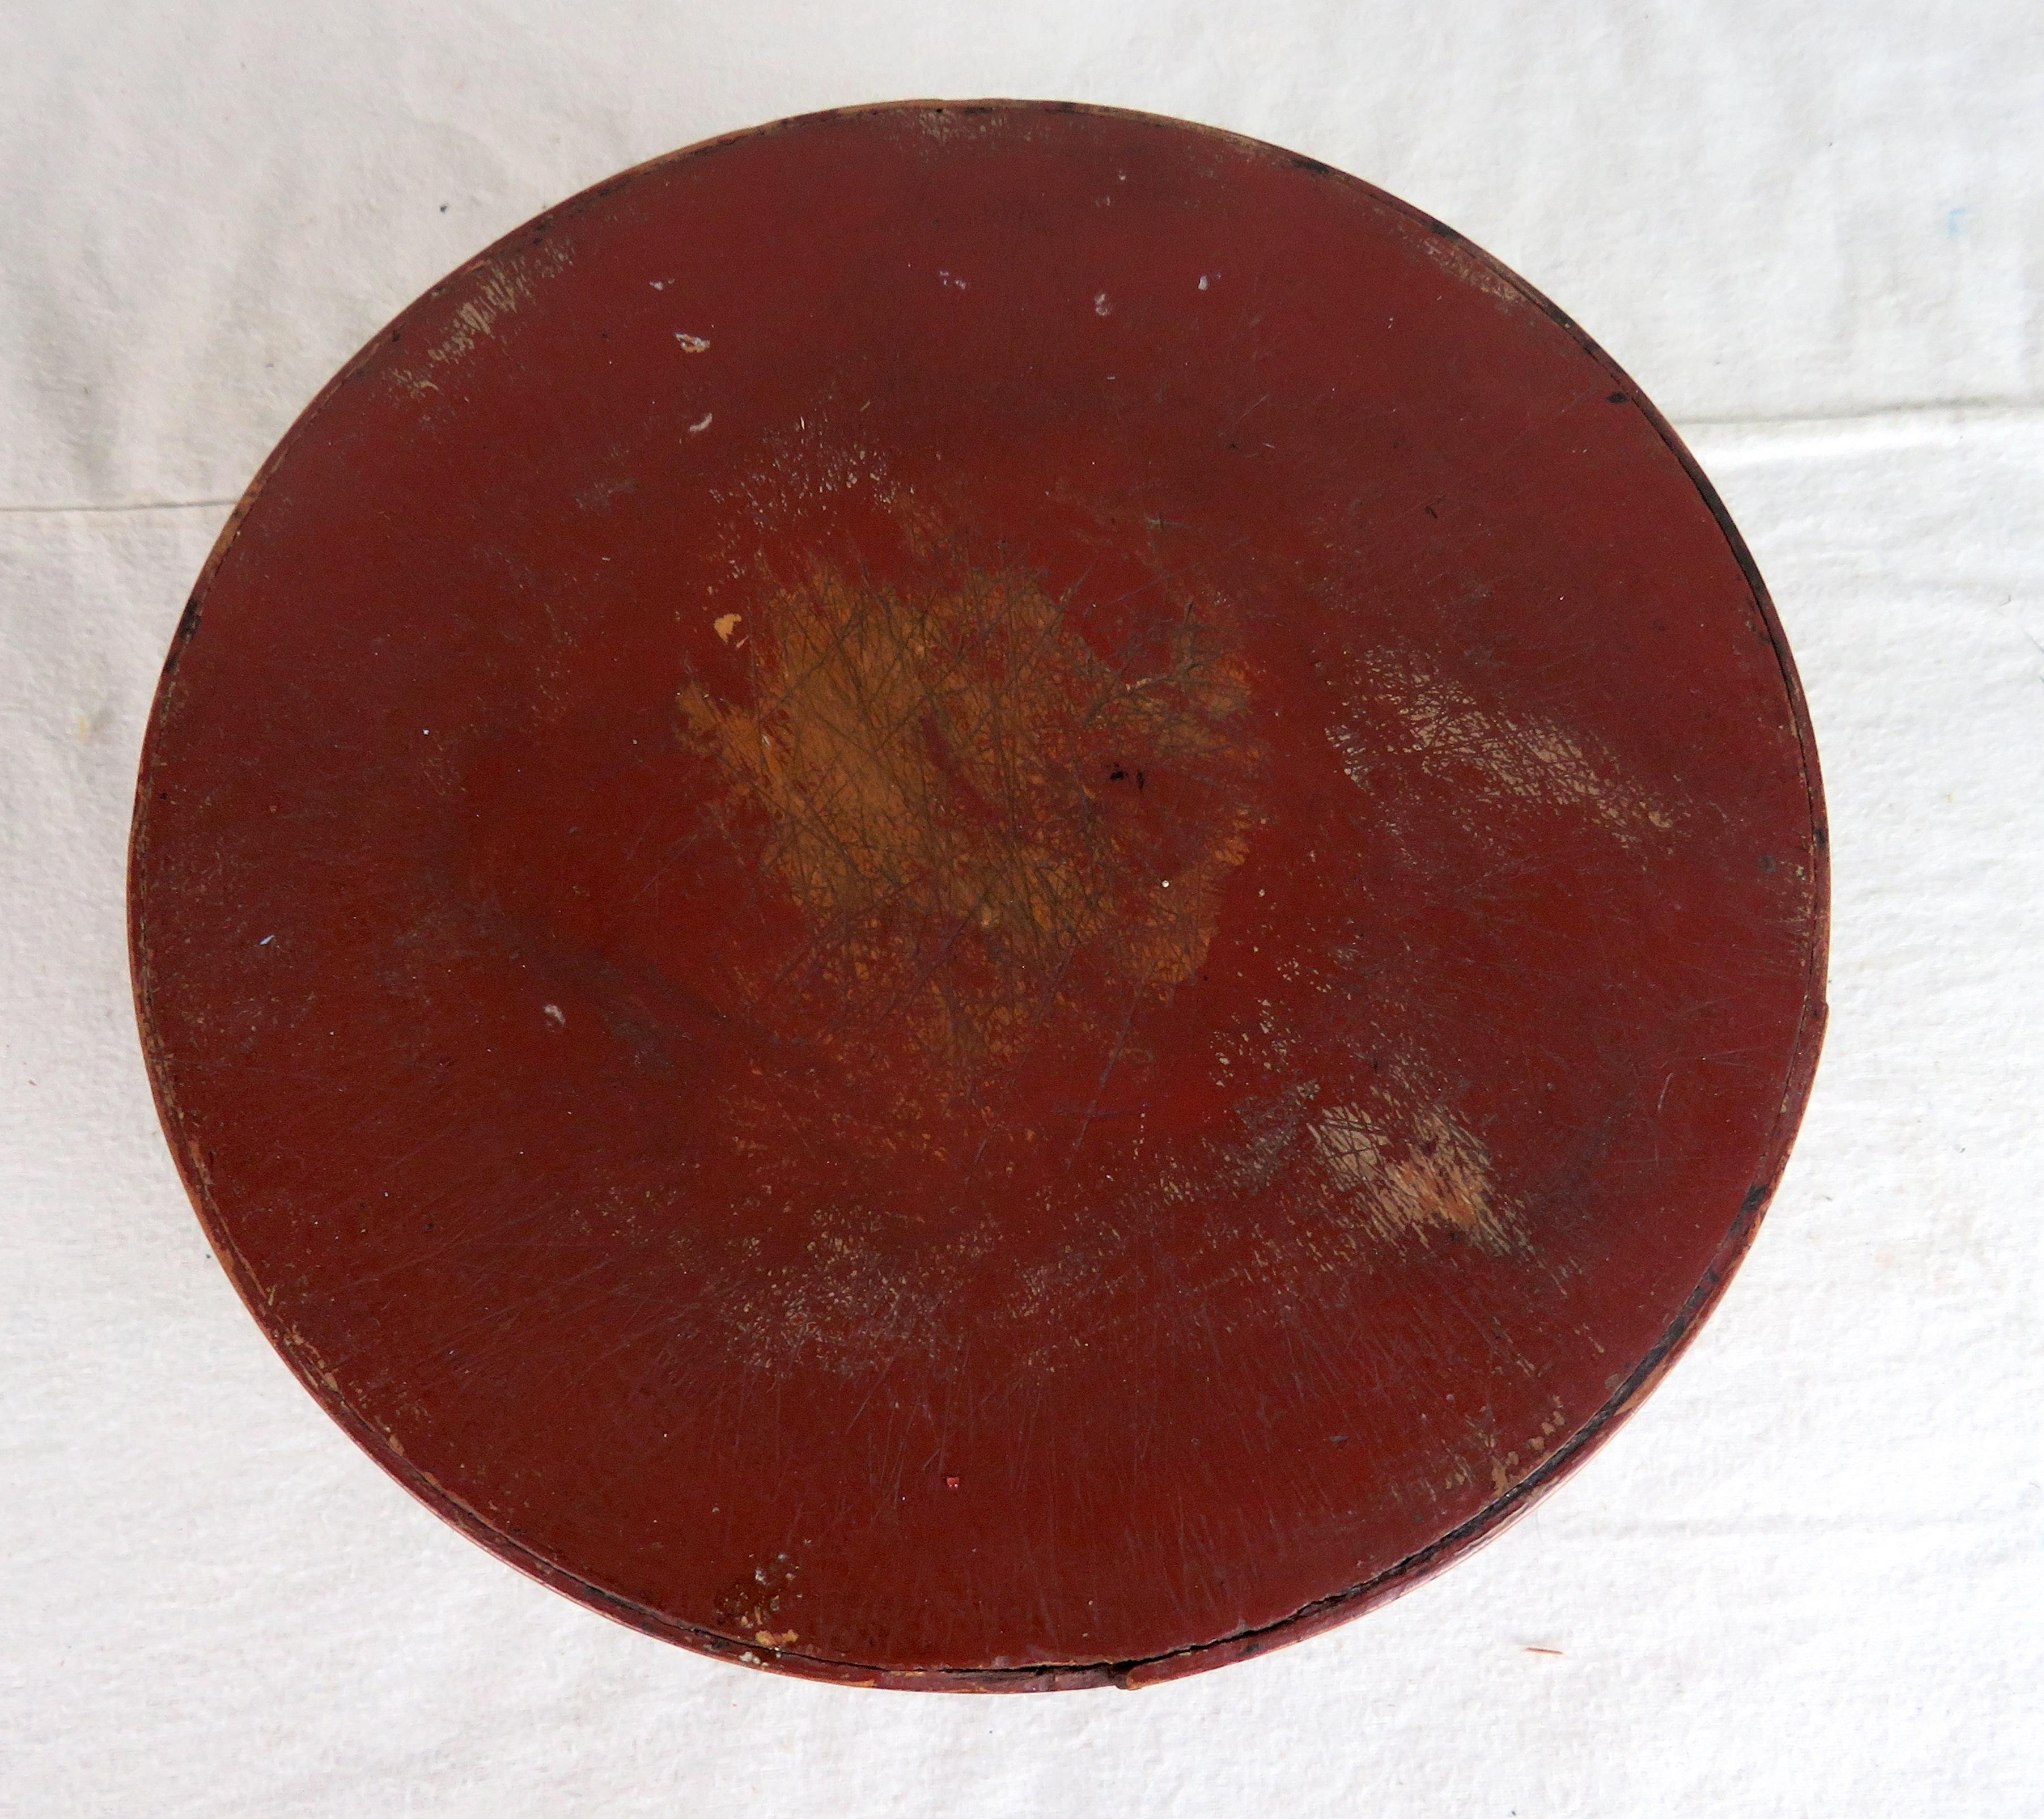 19th Century bentwood box. Round form with red paint.